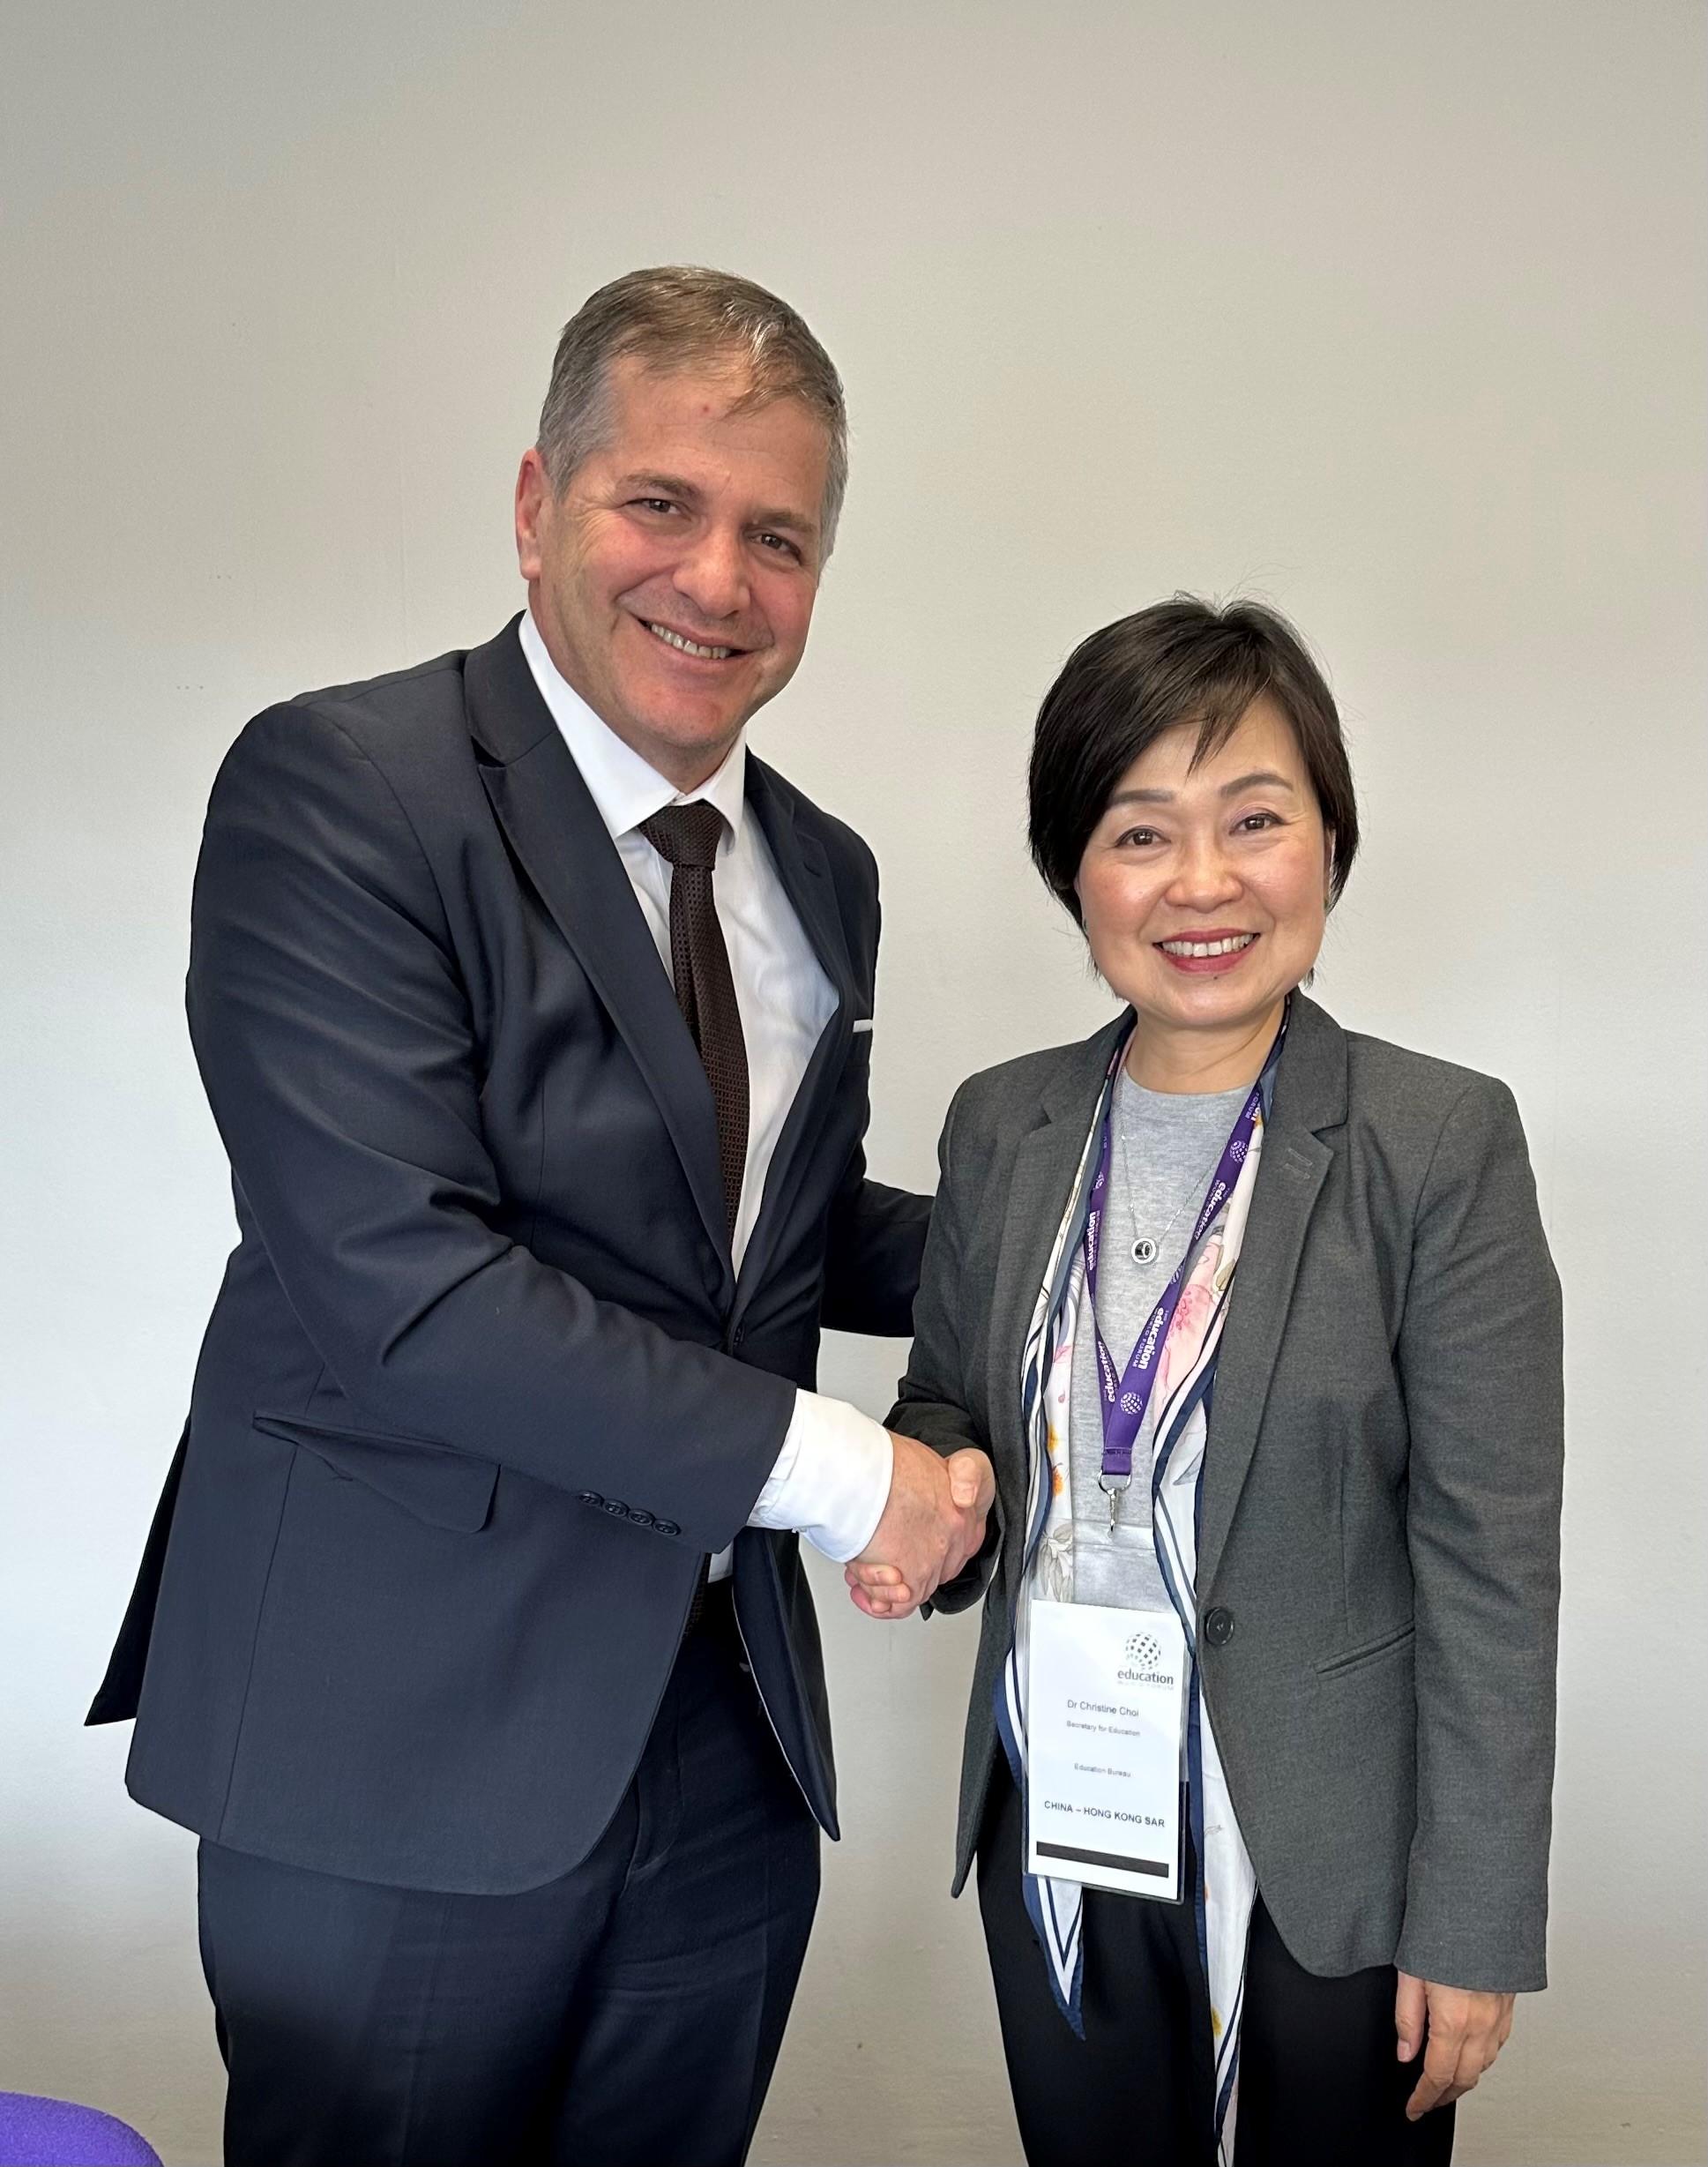 The Secretary for Education, Dr Choi Yuk-lin (right), meets the Minister of Education of Israel, Mr Yoav Kisch (left), during the Education World Forum in London, the United Kingdom, on May 8 (London time).